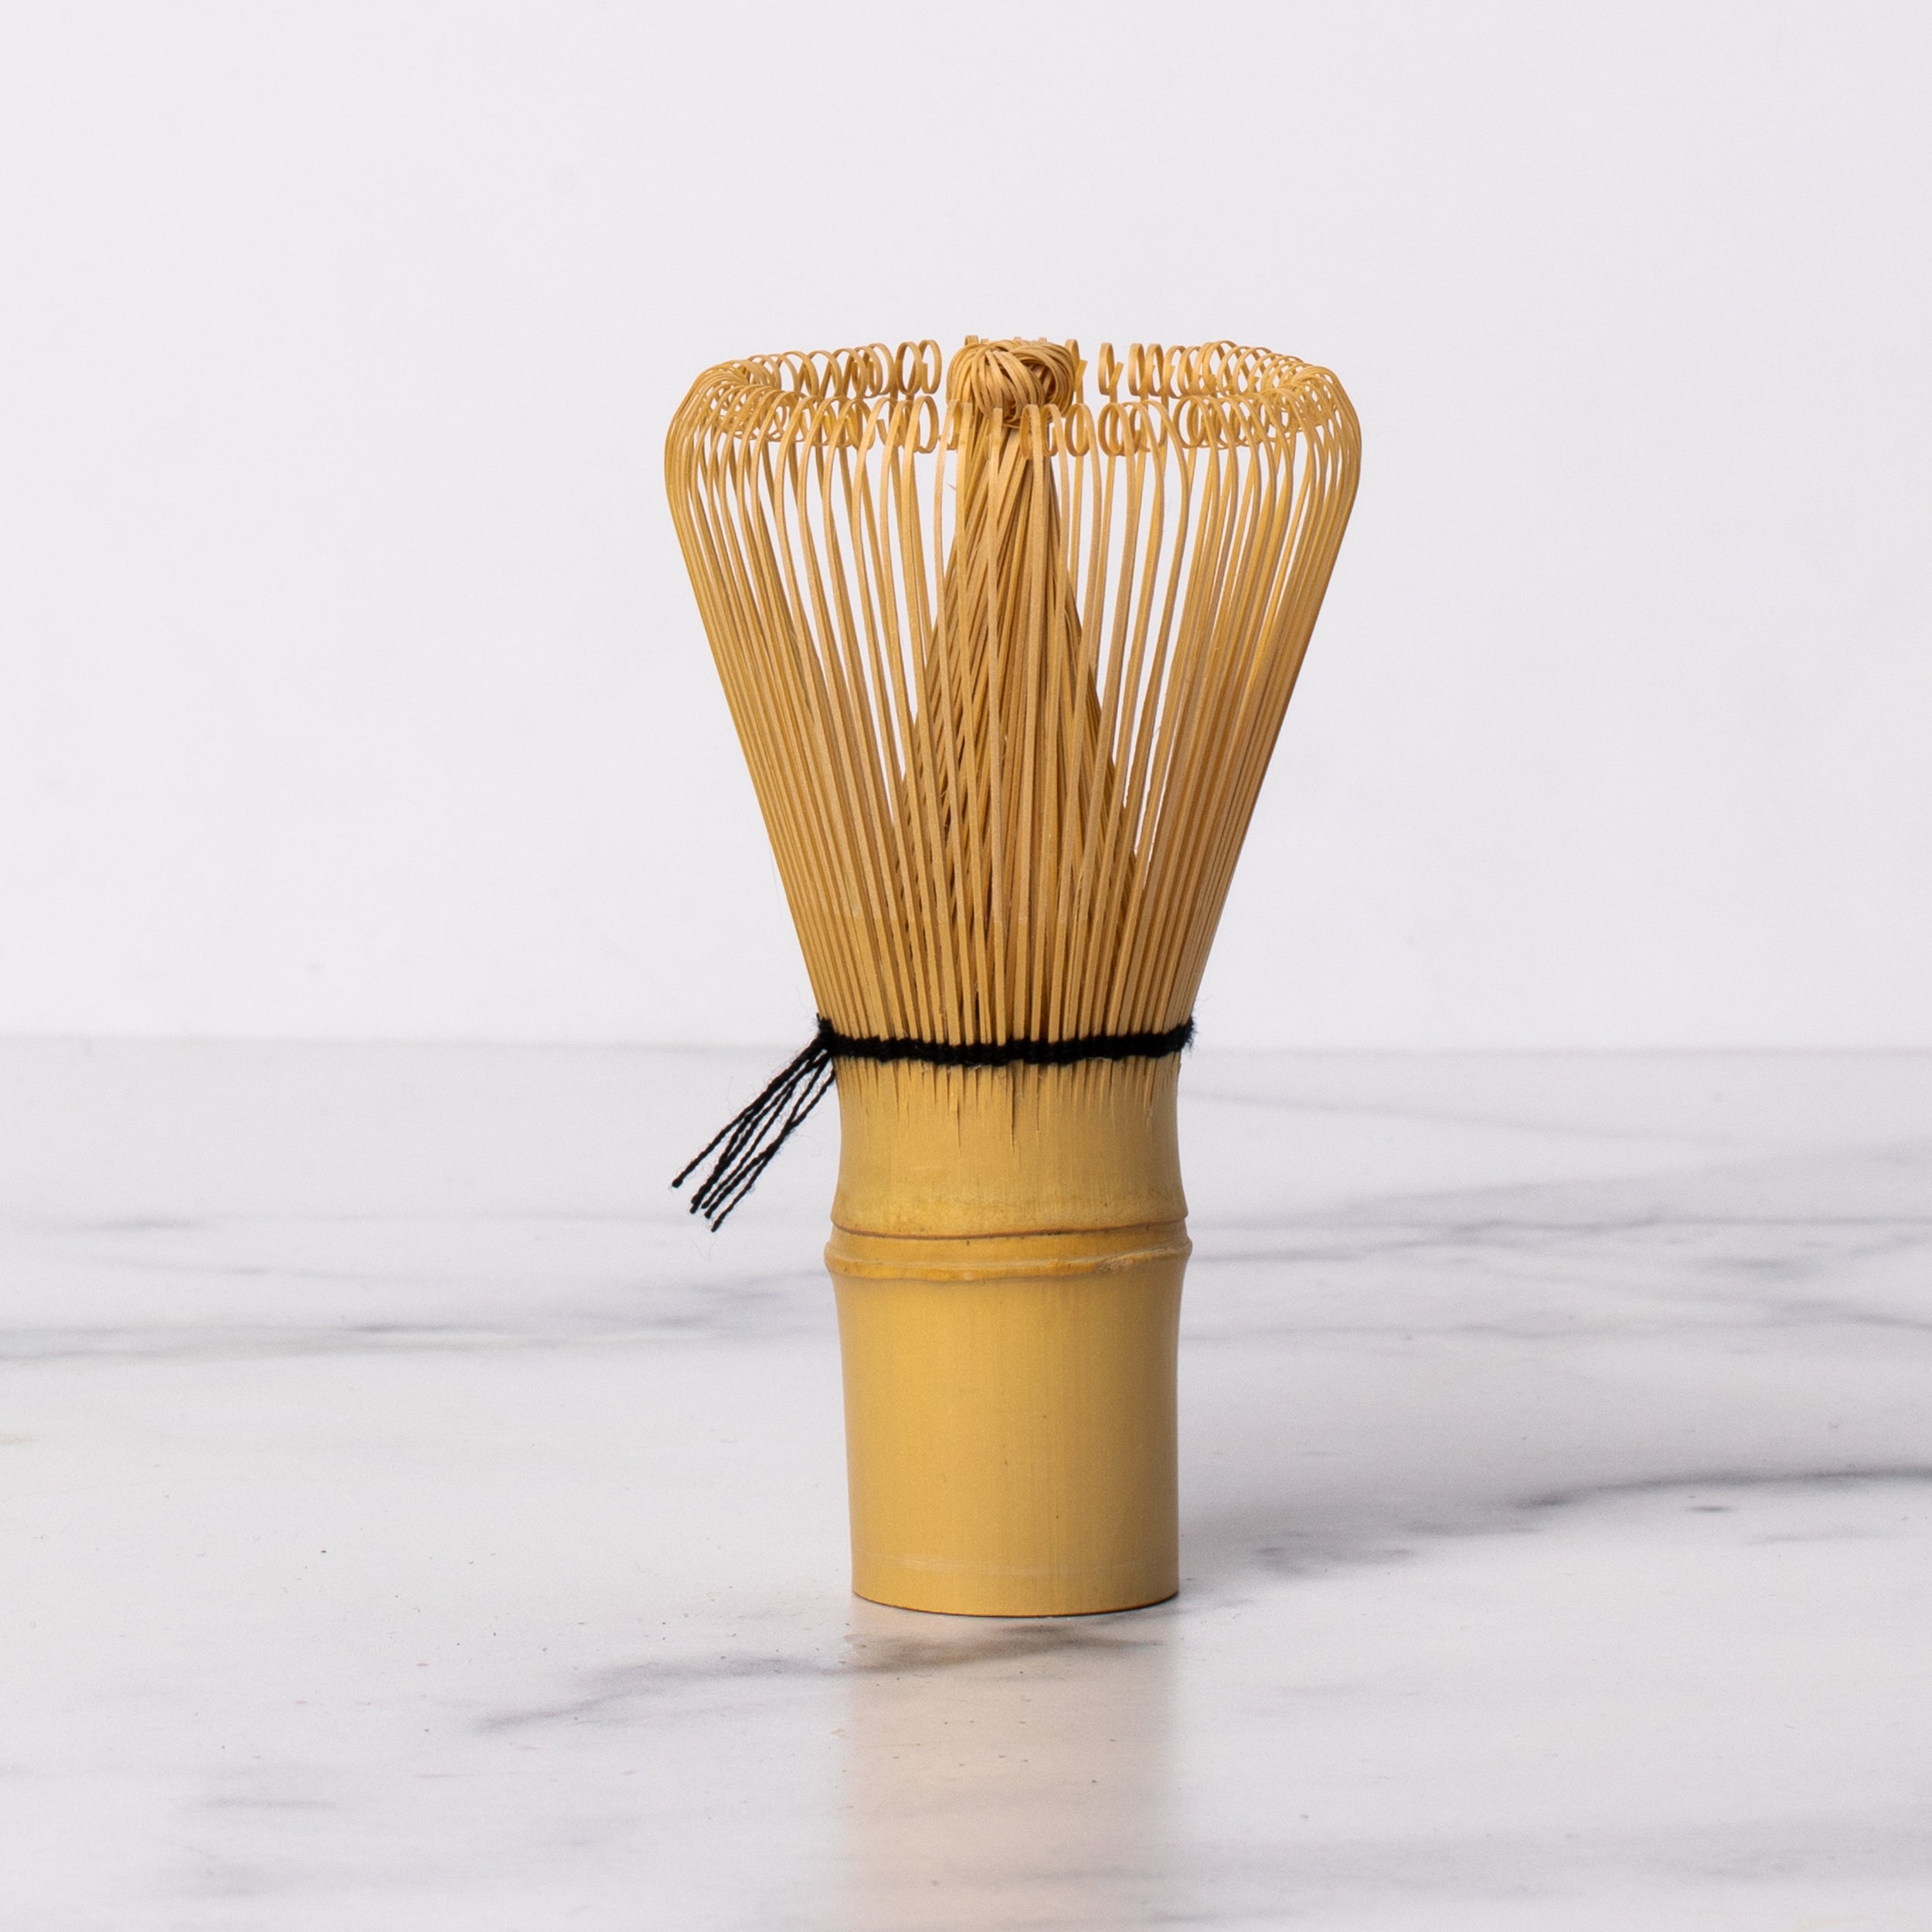 Bamboo matcha whisk with black thread.